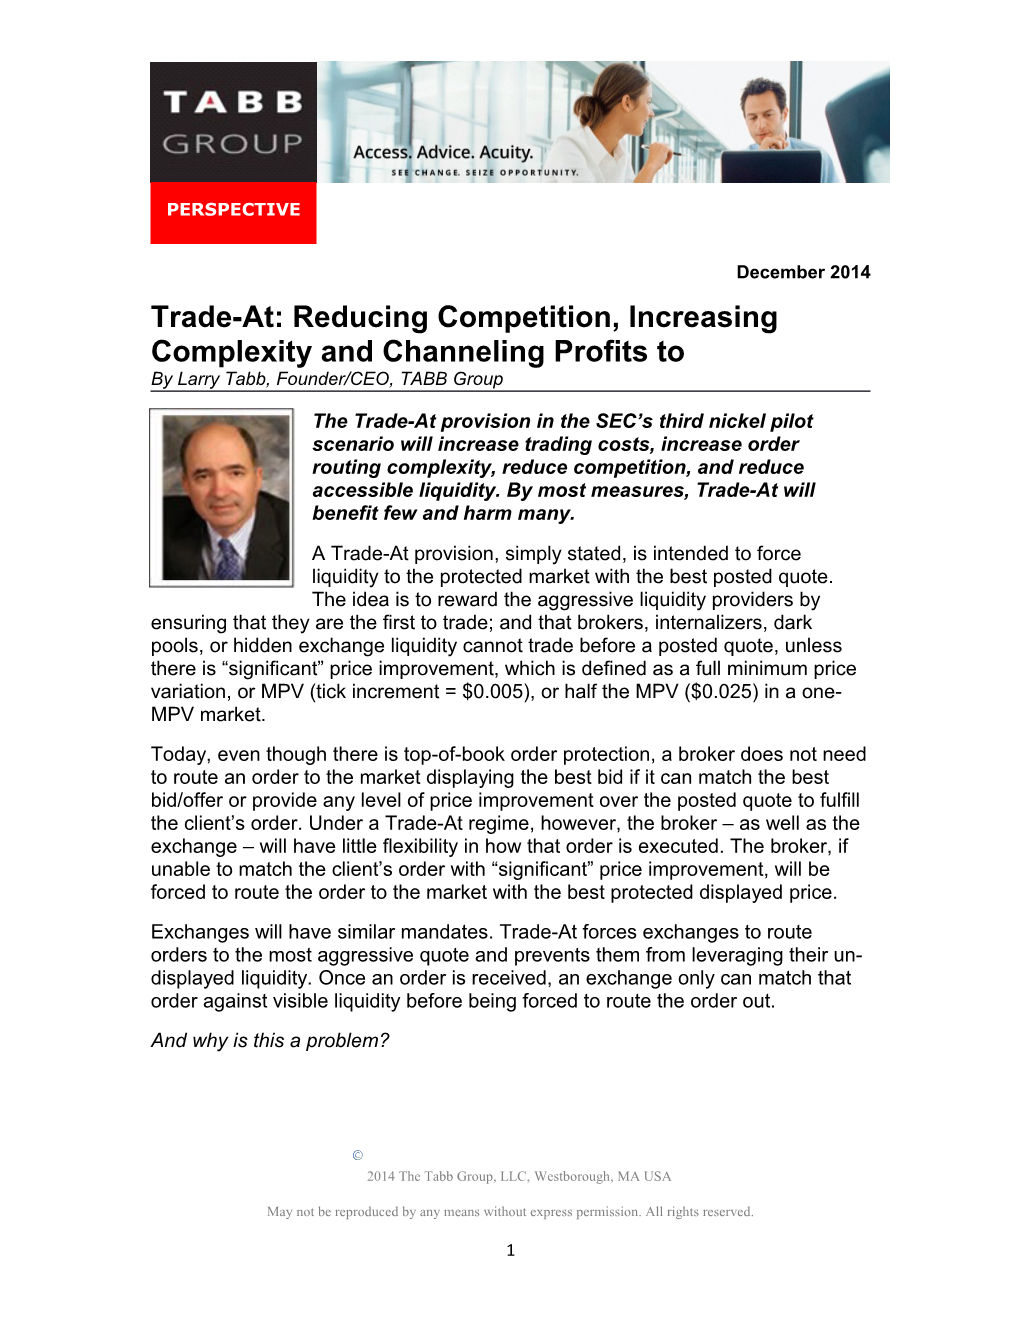 Trade-At: Reducing Competition, Increasing Complexity and Channeling Profits To